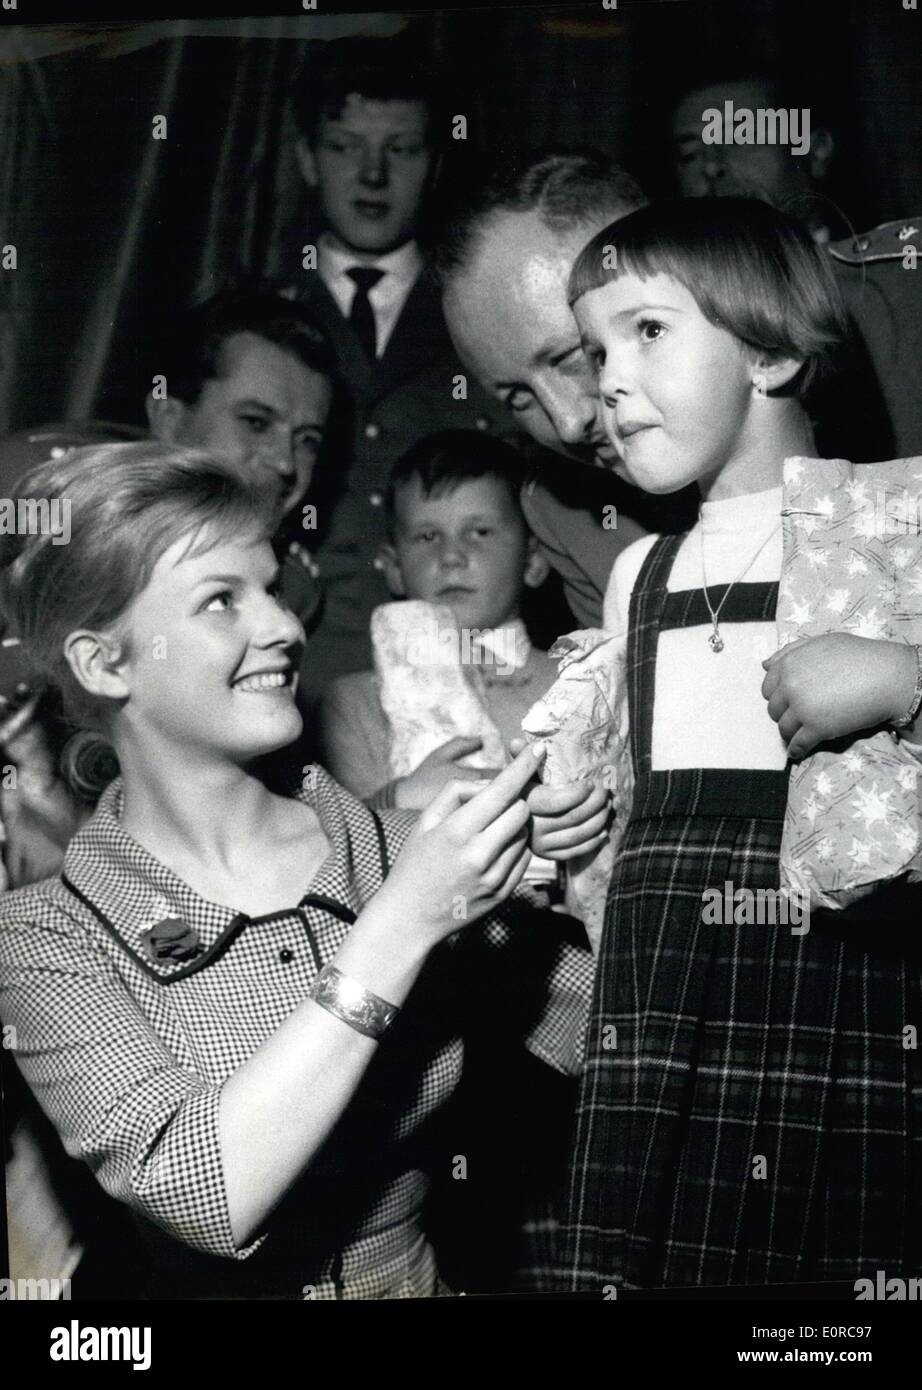 Dec. 12, 1958 - The ''Bundeswehr'' Gives X-Mass Gifts to Children - Allover western Germany the German Army helds X-Mass Partyes for German Children. On there Occasions there is a lot of fun and the Children get toys and Sweetis Today (18.12.58) in Munich a X-Mass Party Tooks Part at the Lowenbrau-Cellar. More Than 500 Children had anice time and got present-parcels. OPS: Film-Actress Heidi Bruhl (Heidi Bruehl) and Lieutenant-Colonel Mayer (Mayer) - Right in the Picture- Giving Presented to a little gril. Stock Photo